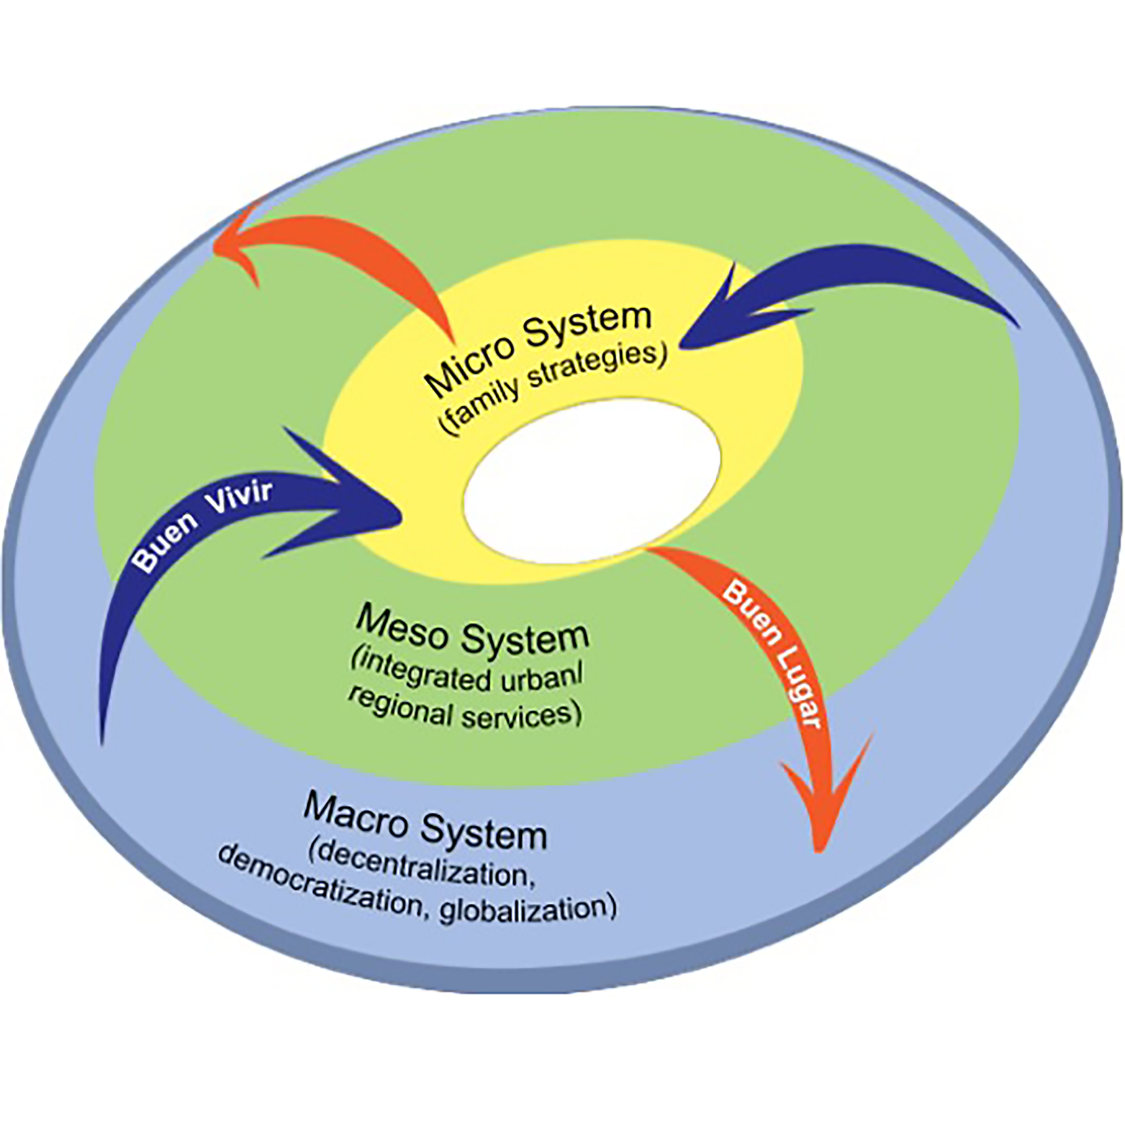 Conceptual Framework: Human Ecological Model - A Network Flows. Graphic by Hector Chang